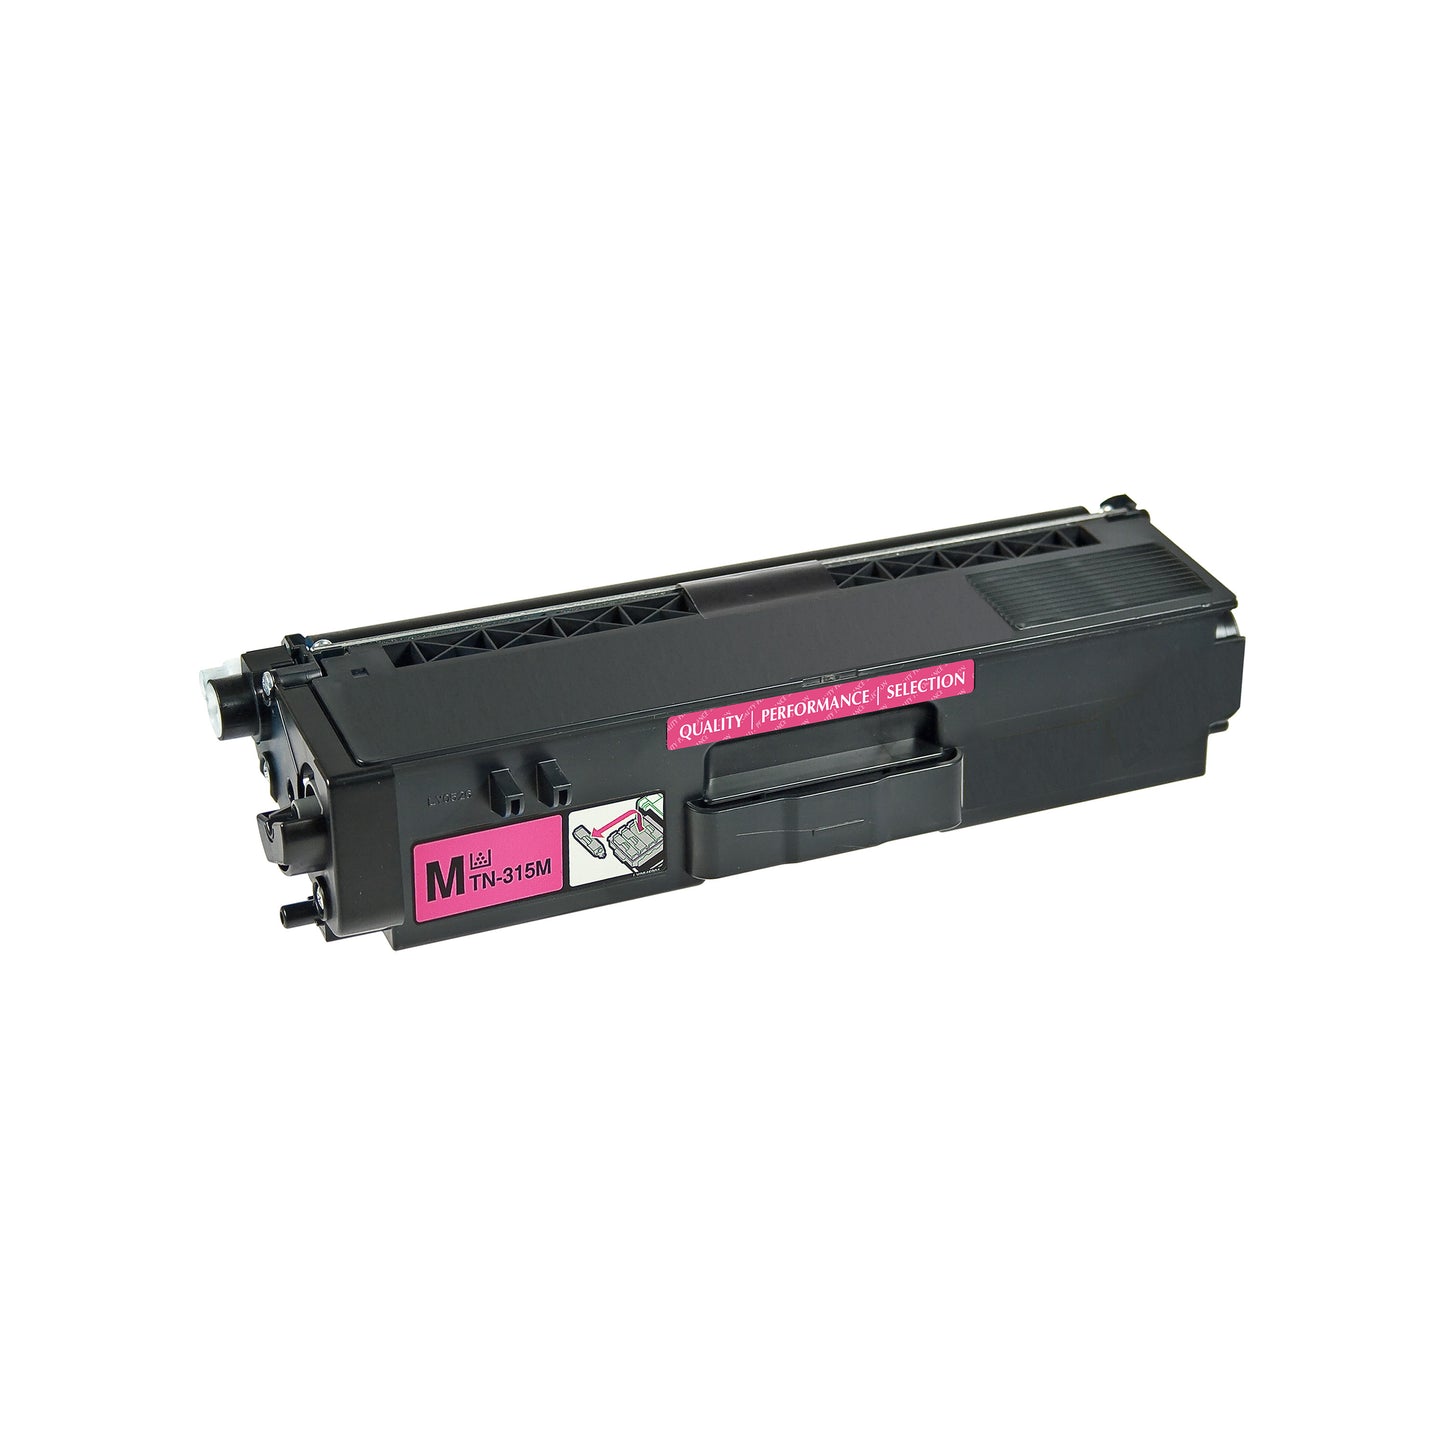 Brother TN-315M Magenta High Yield Toner Cartridge | 3,500 Pages | Remanufactured